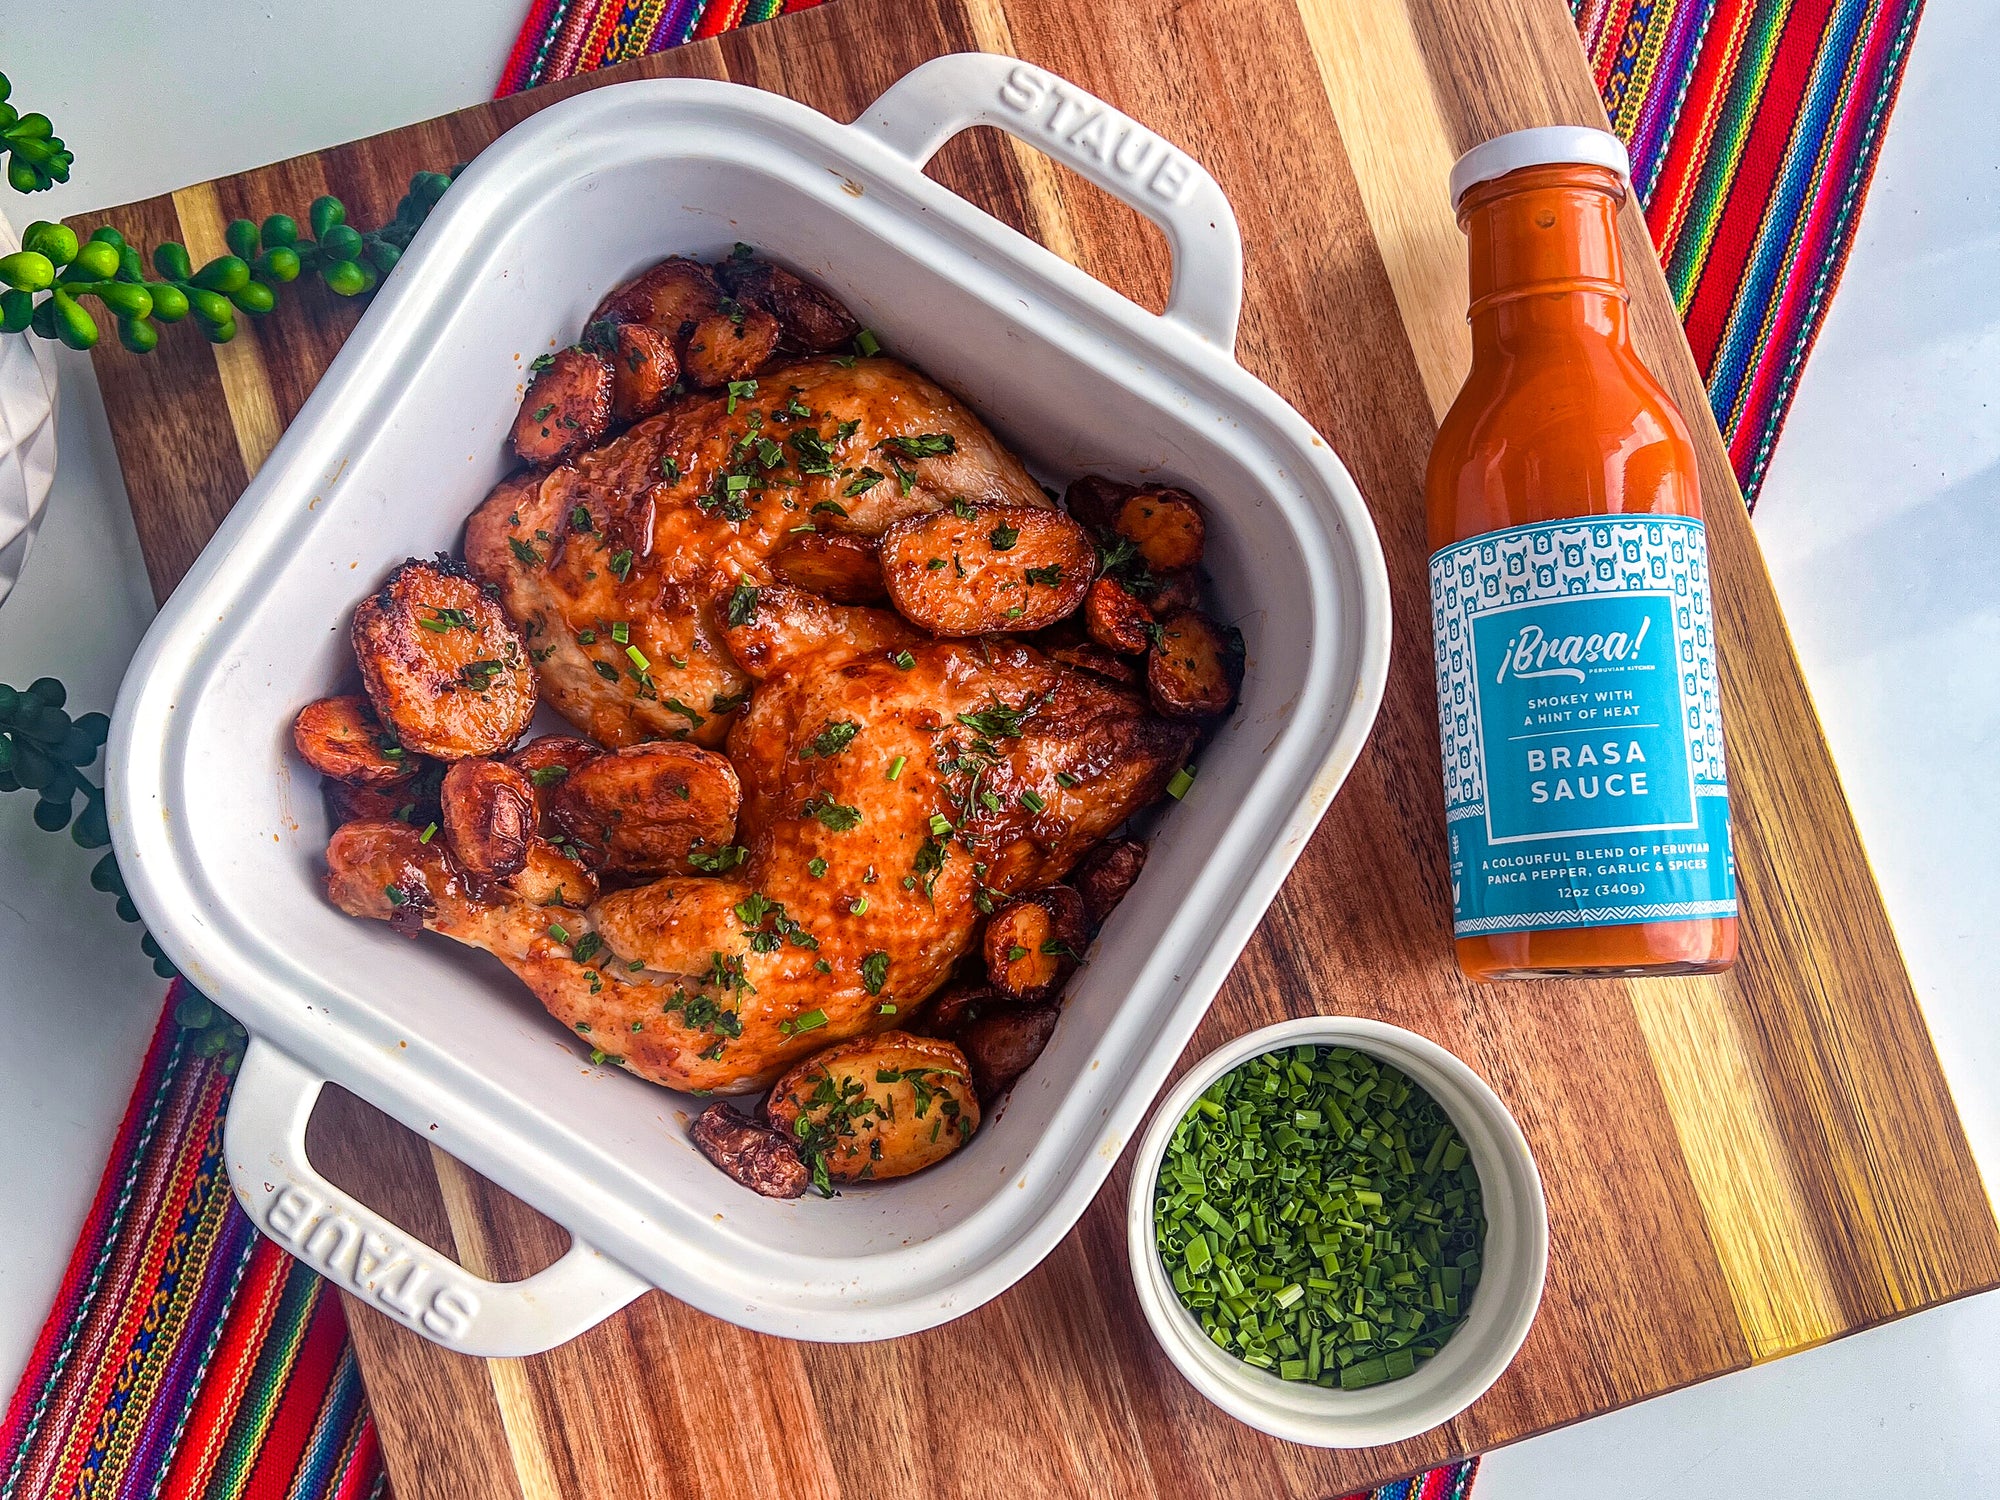 You Have to Try This Delicious One Sheet Pan Chicken and Potatoes with Brasa Sauce Recipe!